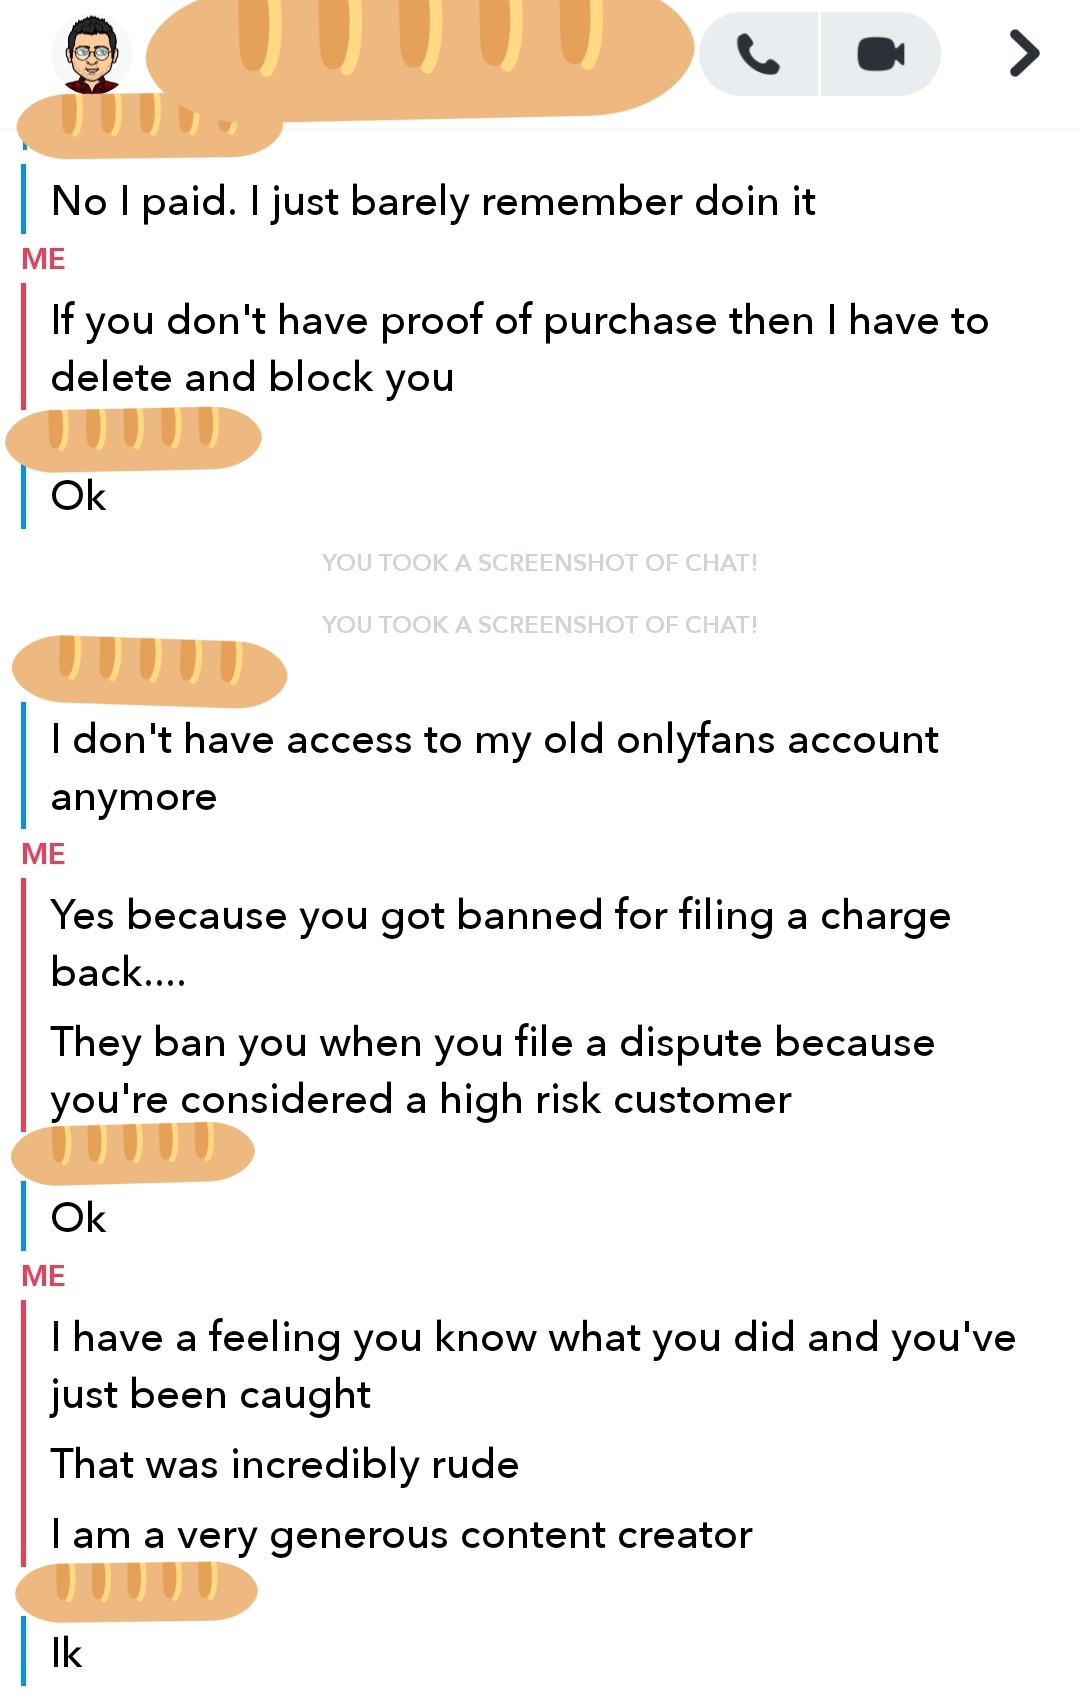 Only fans chargeback